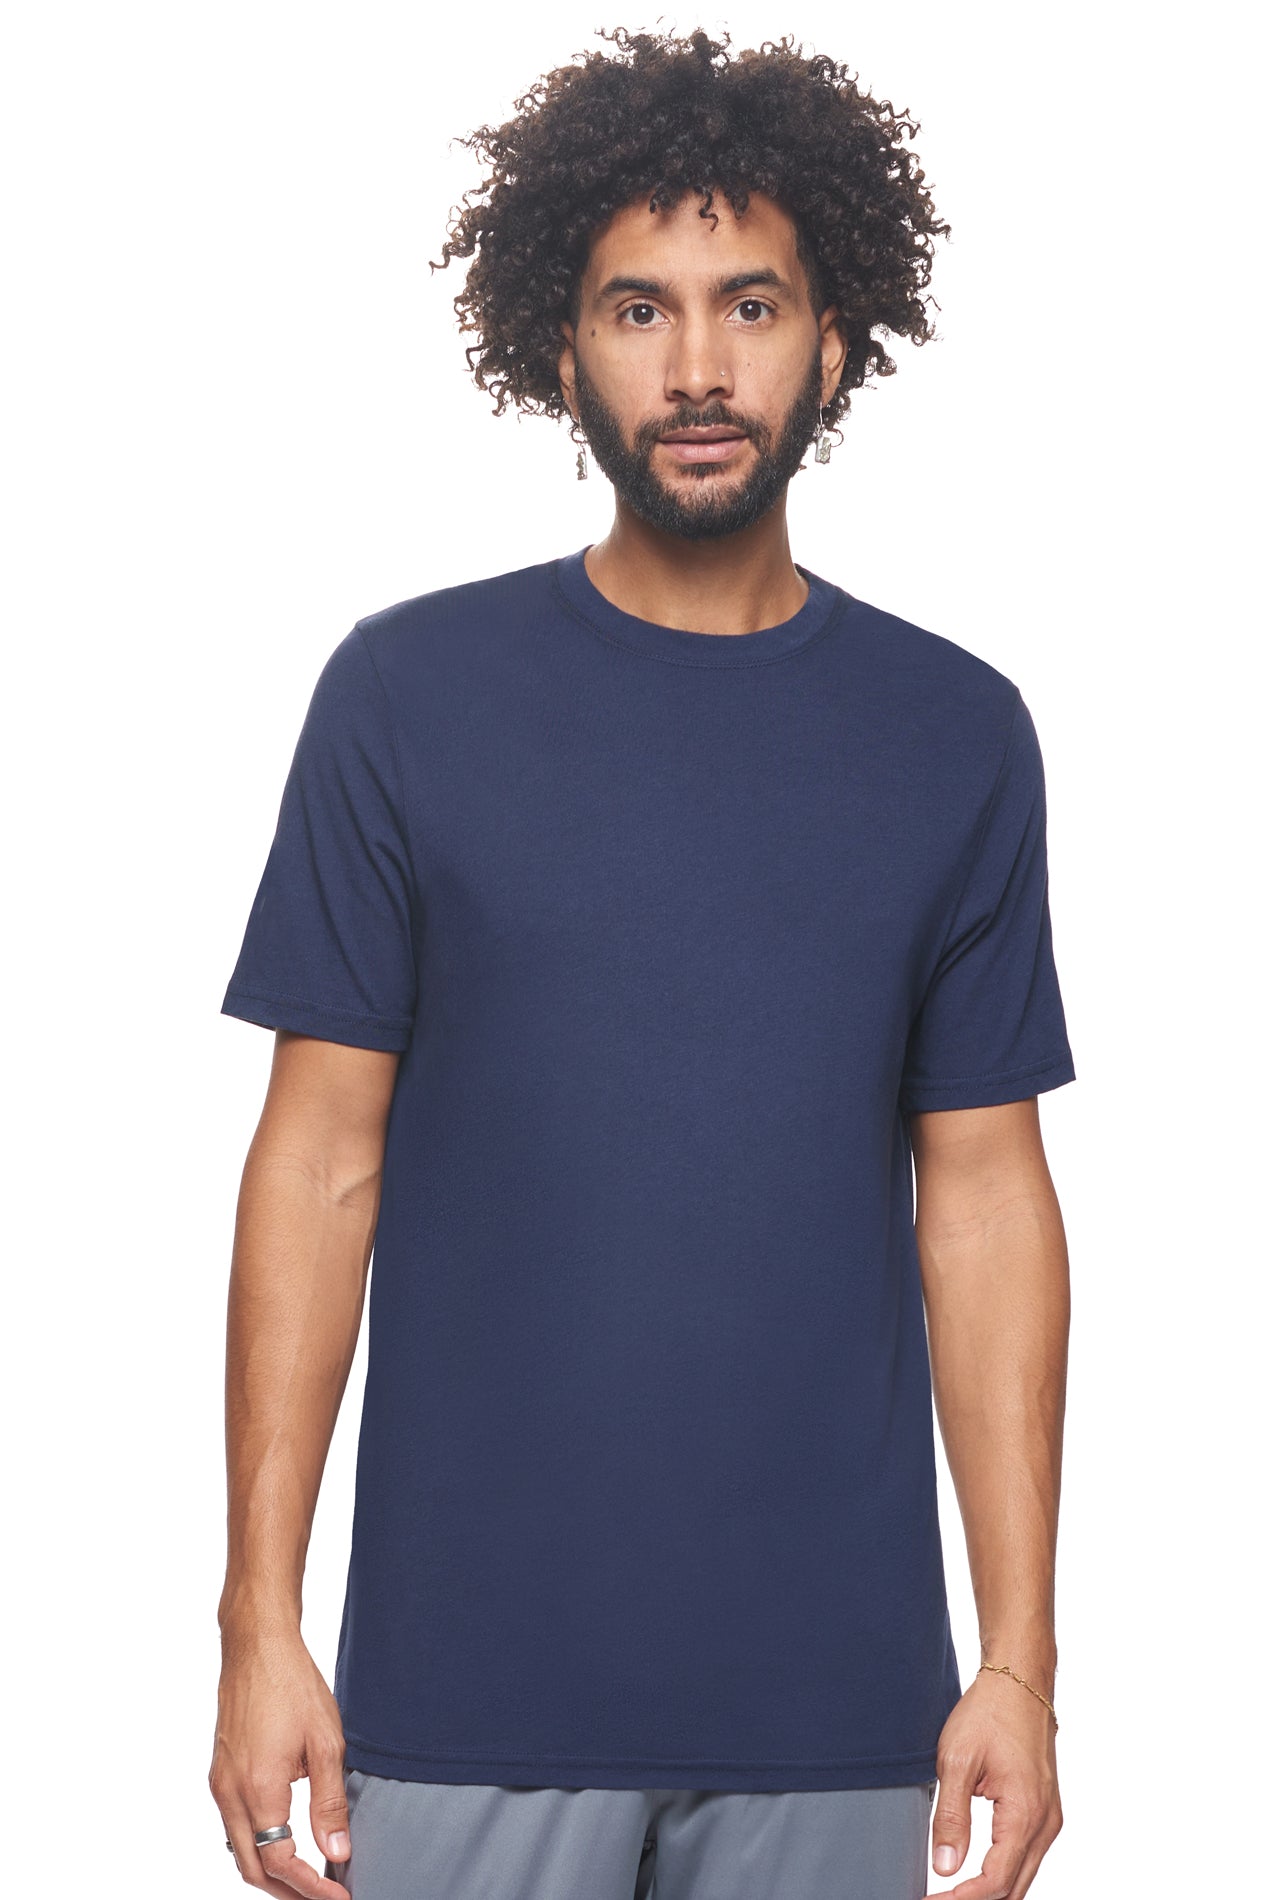 Expert Brand Retail Sustainable Eco-Friendly Micromodal Cotton Men's Crewneck T-Shirt Made in USA navy#color_navy